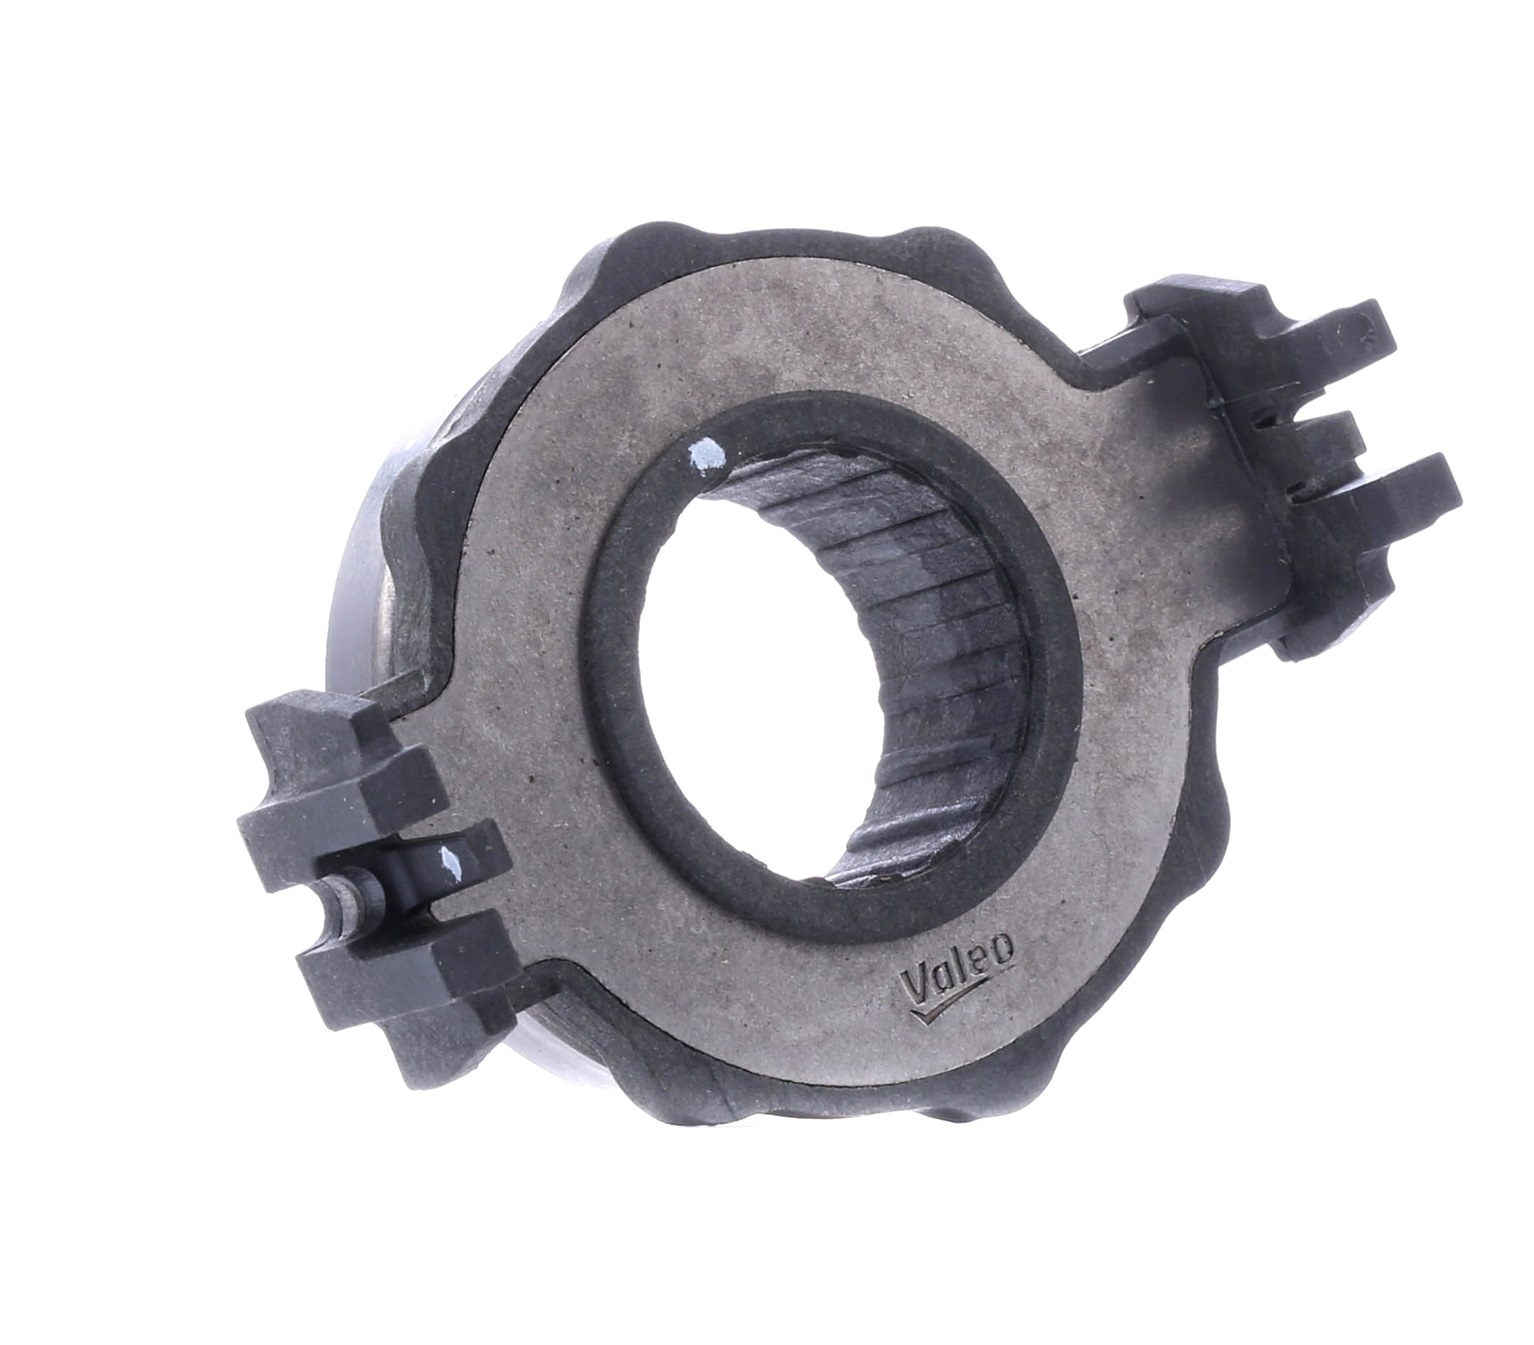 Image of VALEO Clutch Release Bearing FIAT,PEUGEOT,CITROËN 079937 1611267780,204142,204160 Clutch Bearing,Release Bearing,Releaser 204167,96050128,96090882